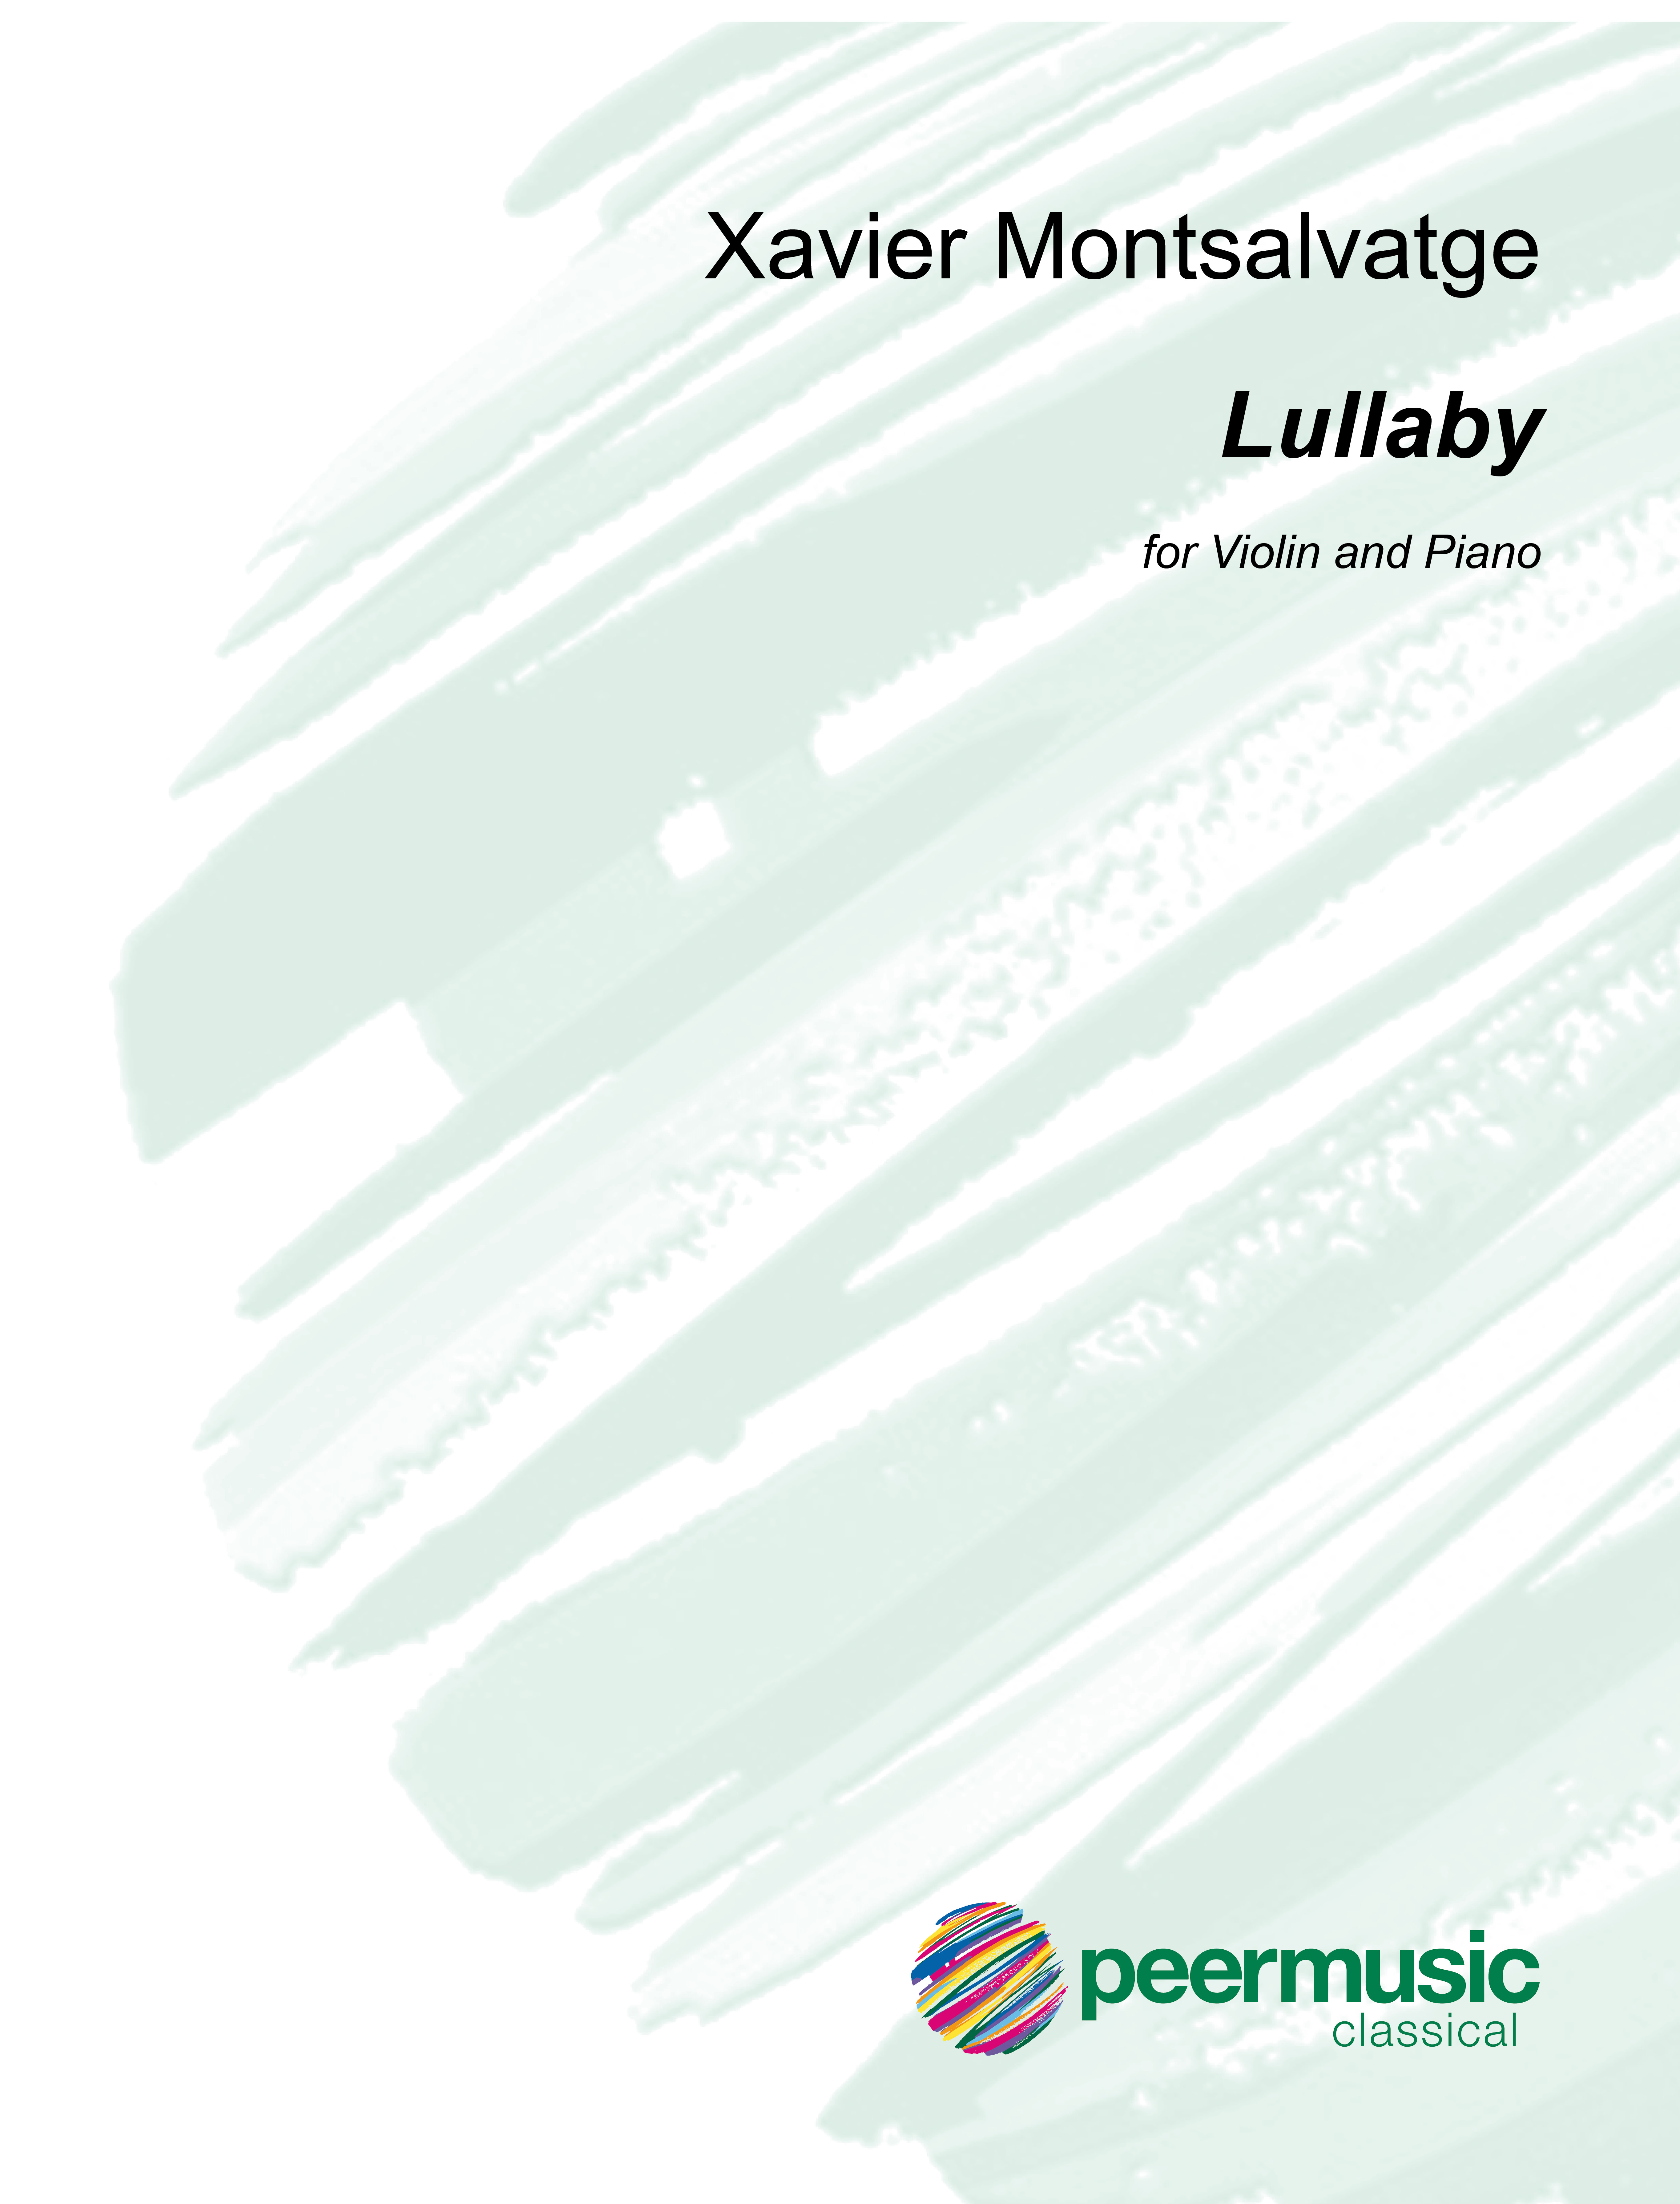 Lullaby  for violin and piano  